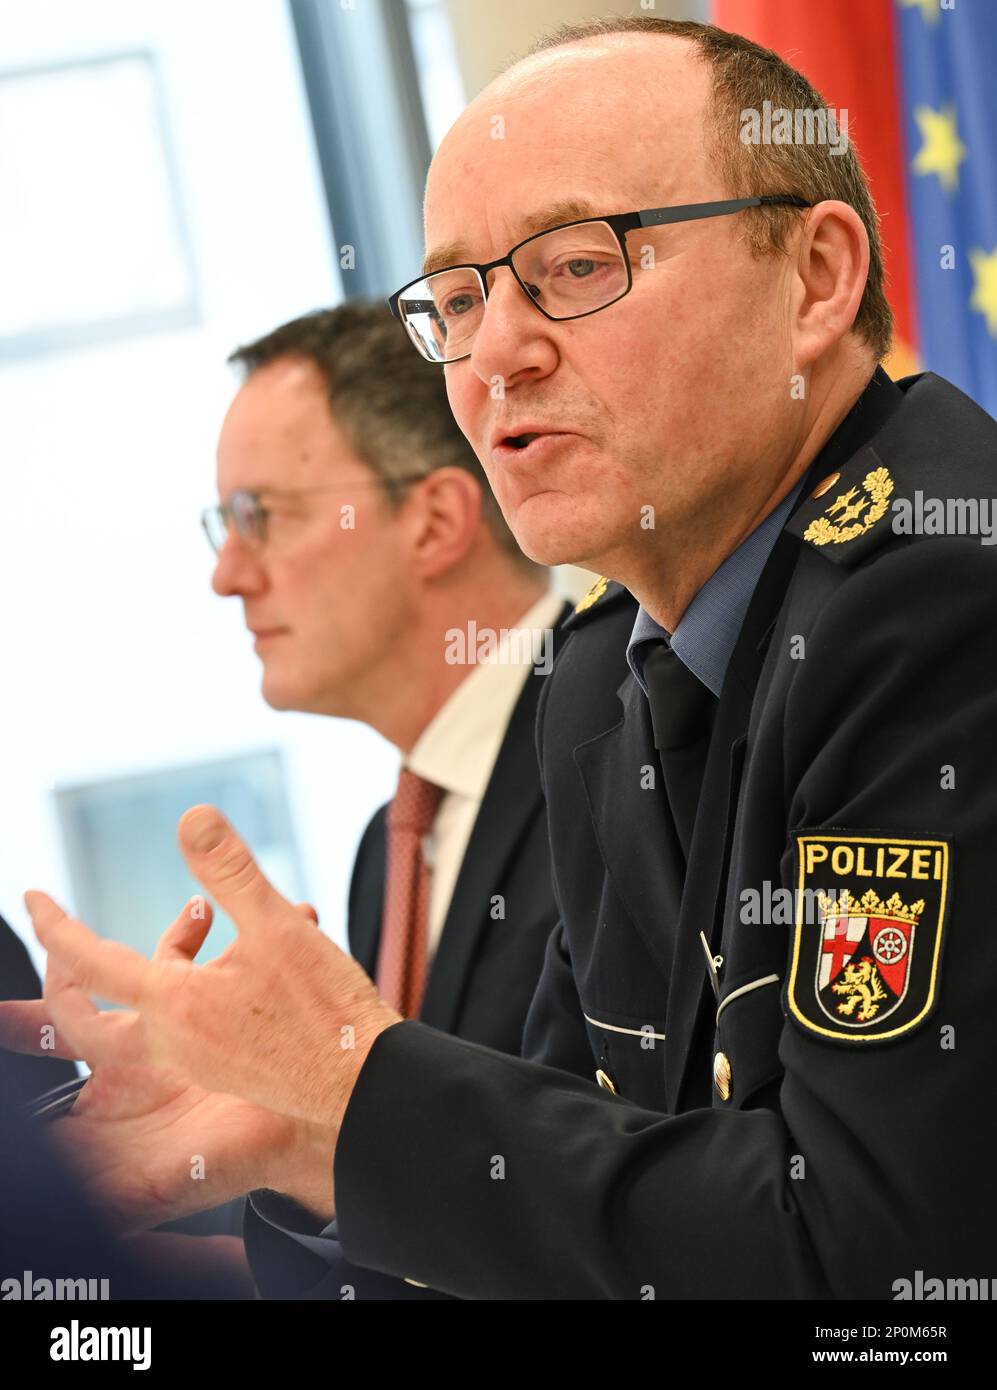 Mainz, Germany. 03rd Mar, 2023. Friedel Durben (r), Inspector of the Rhineland-Palatinate Police, and Michael Ebling (SPD), Interior Minister of Rhineland-Palatinate, present reforms and modernizations in the fight against crime at a press conference at the Ministry of the Interior. The aim is to better position the state police for the challenges of crime in times of increasing digitalization and internationalization. Credit: Arne Dedert/dpa/Alamy Live News Stock Photo